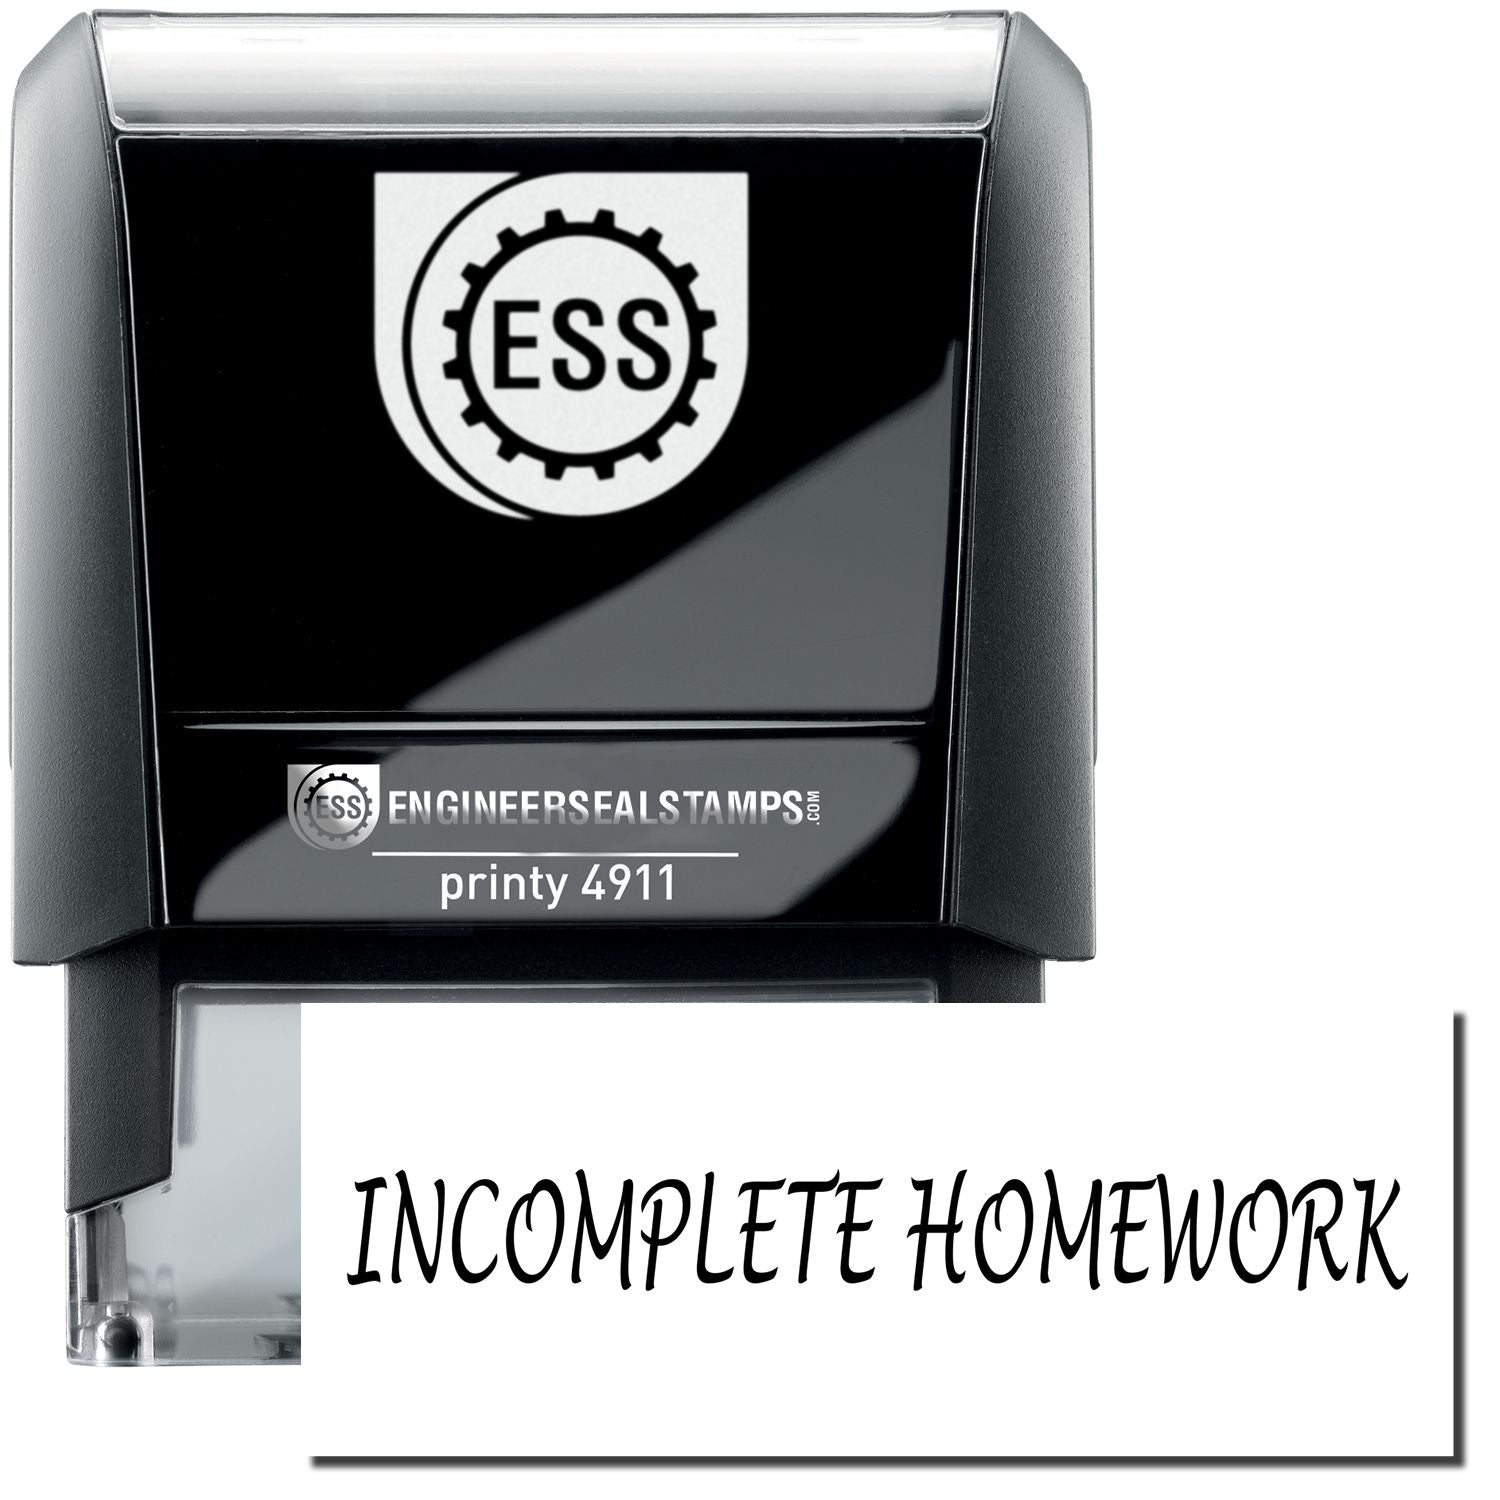 A self-inking stamp with a stamped image showing how the text "INCOMPLETE HOMEWORK" is displayed after stamping.